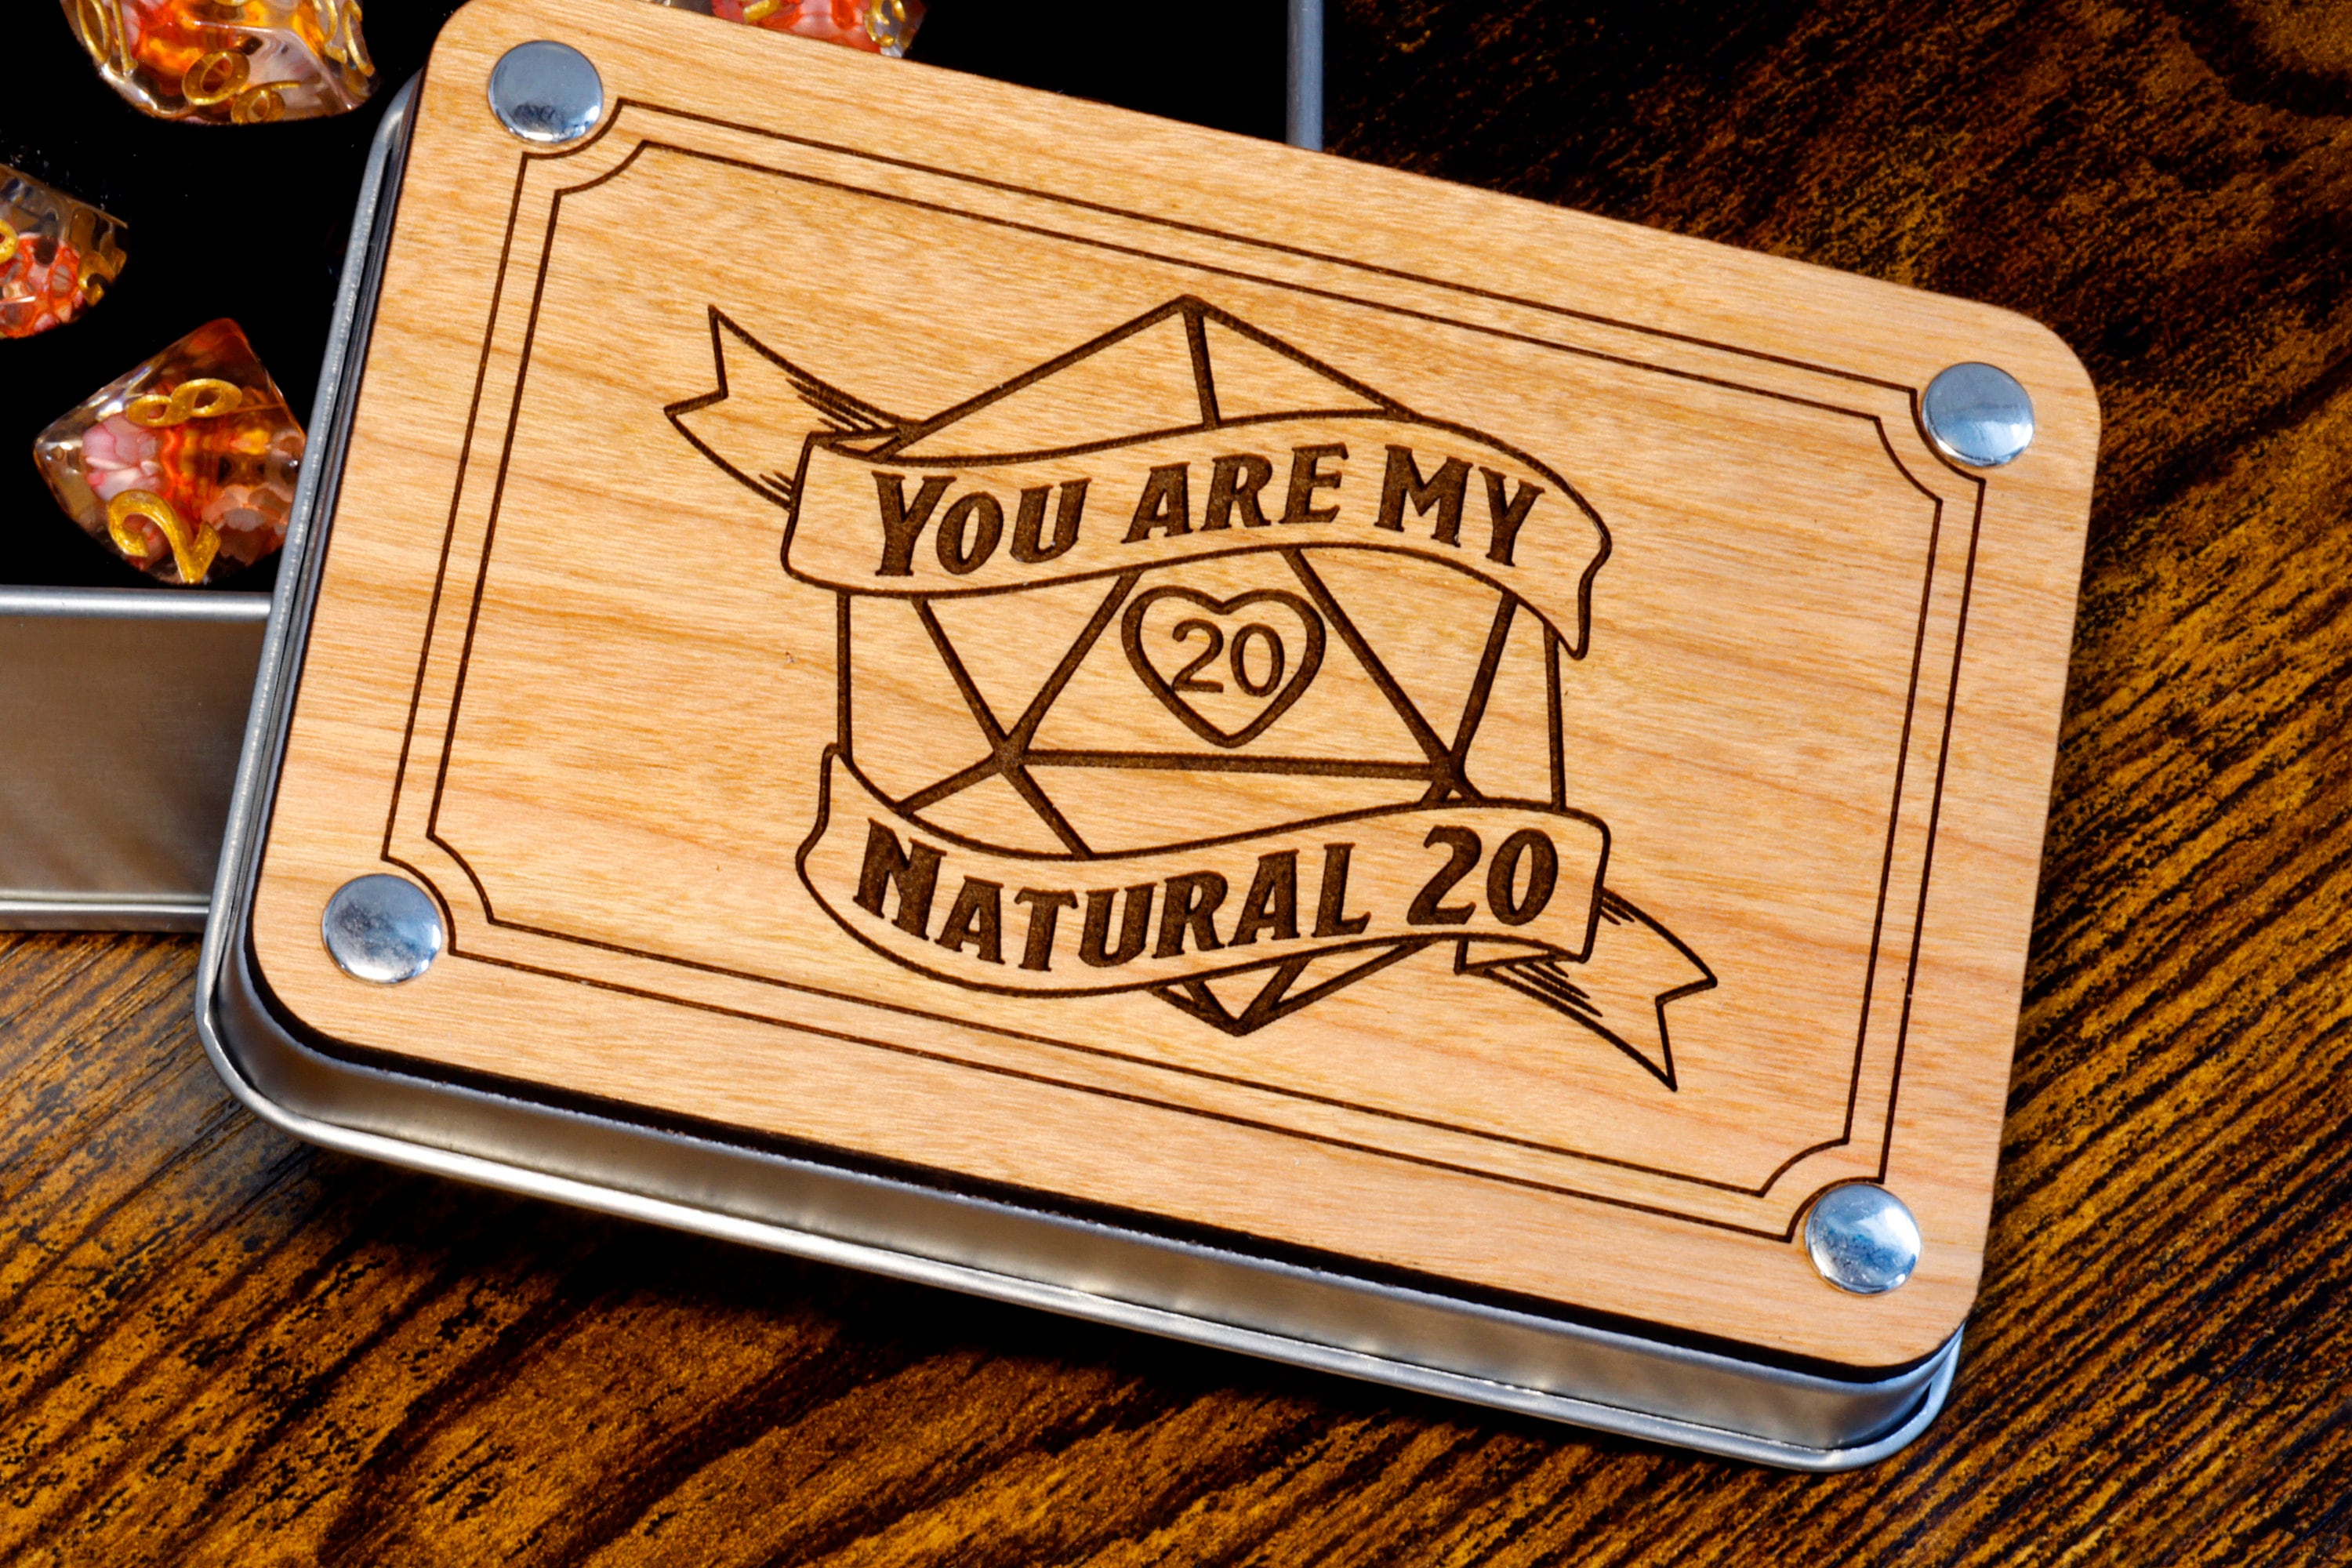 You are my natural 20 ! Dice storage box and dice set